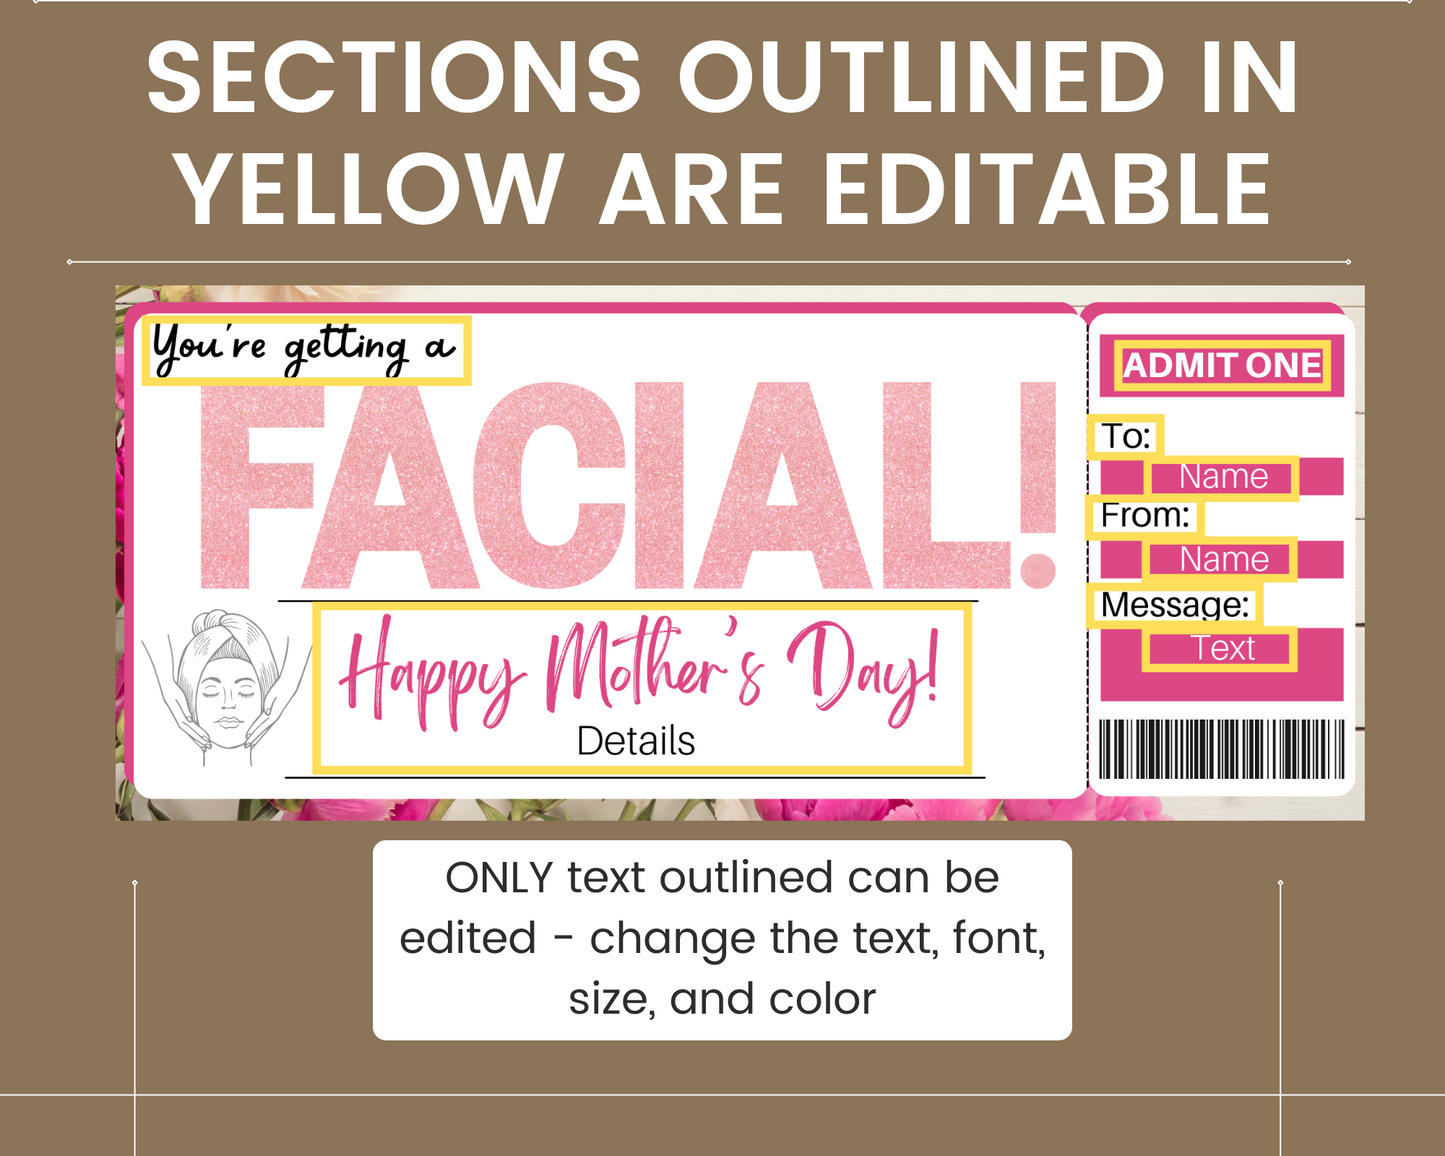 Mother's Day Facial Gift Ticket Template